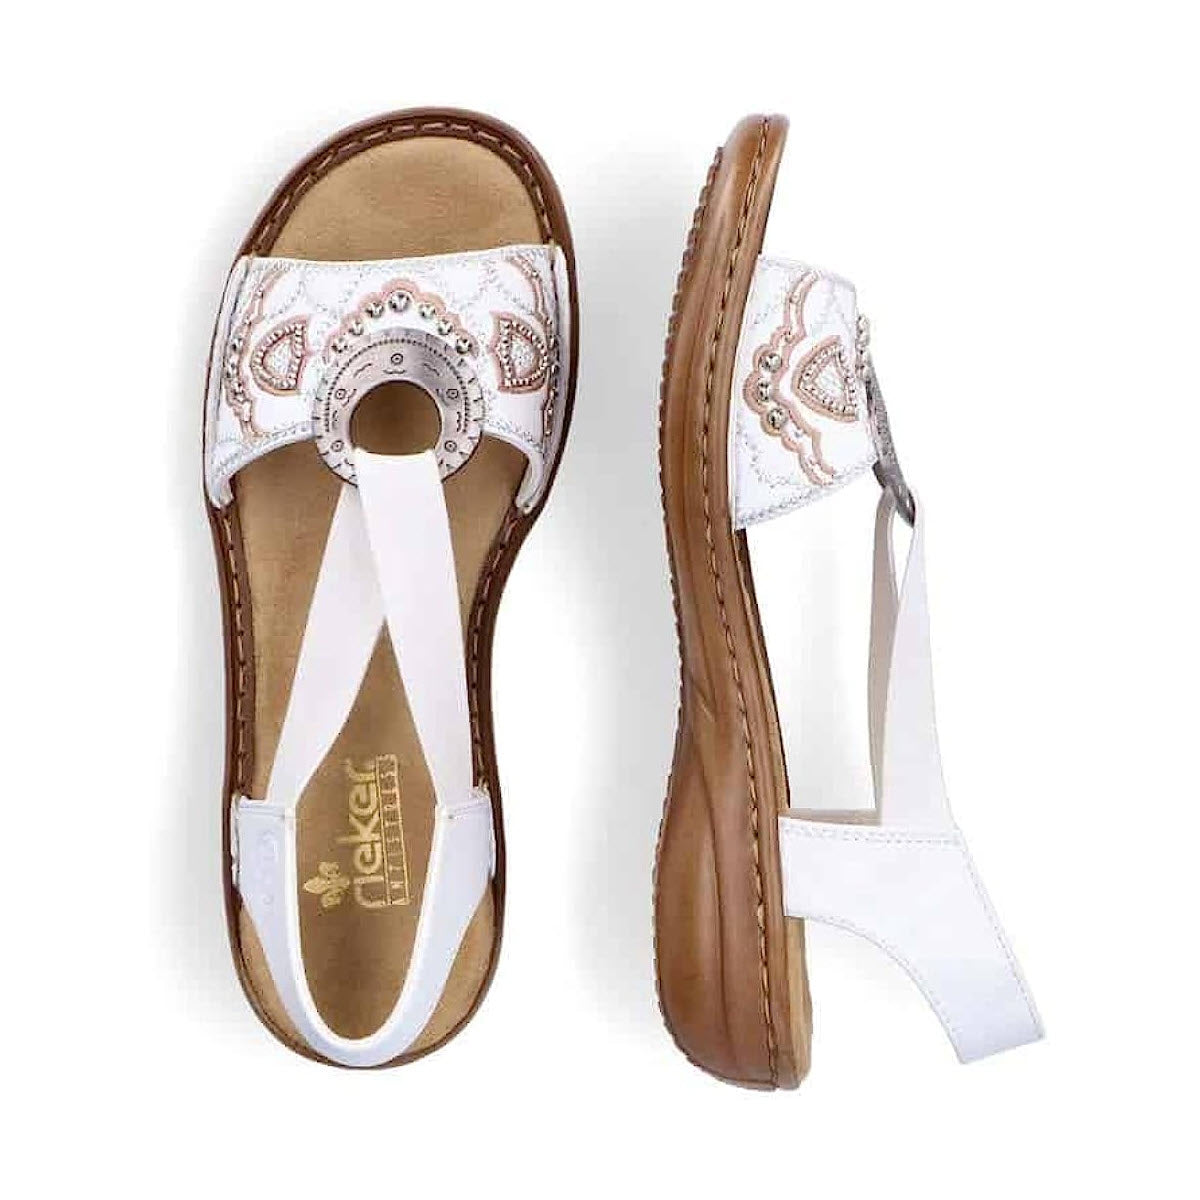 A pair of white and brown women&#39;s Rieker slingback flat sandals with decorative embroidery and a circular emblem on the top, viewed from above.